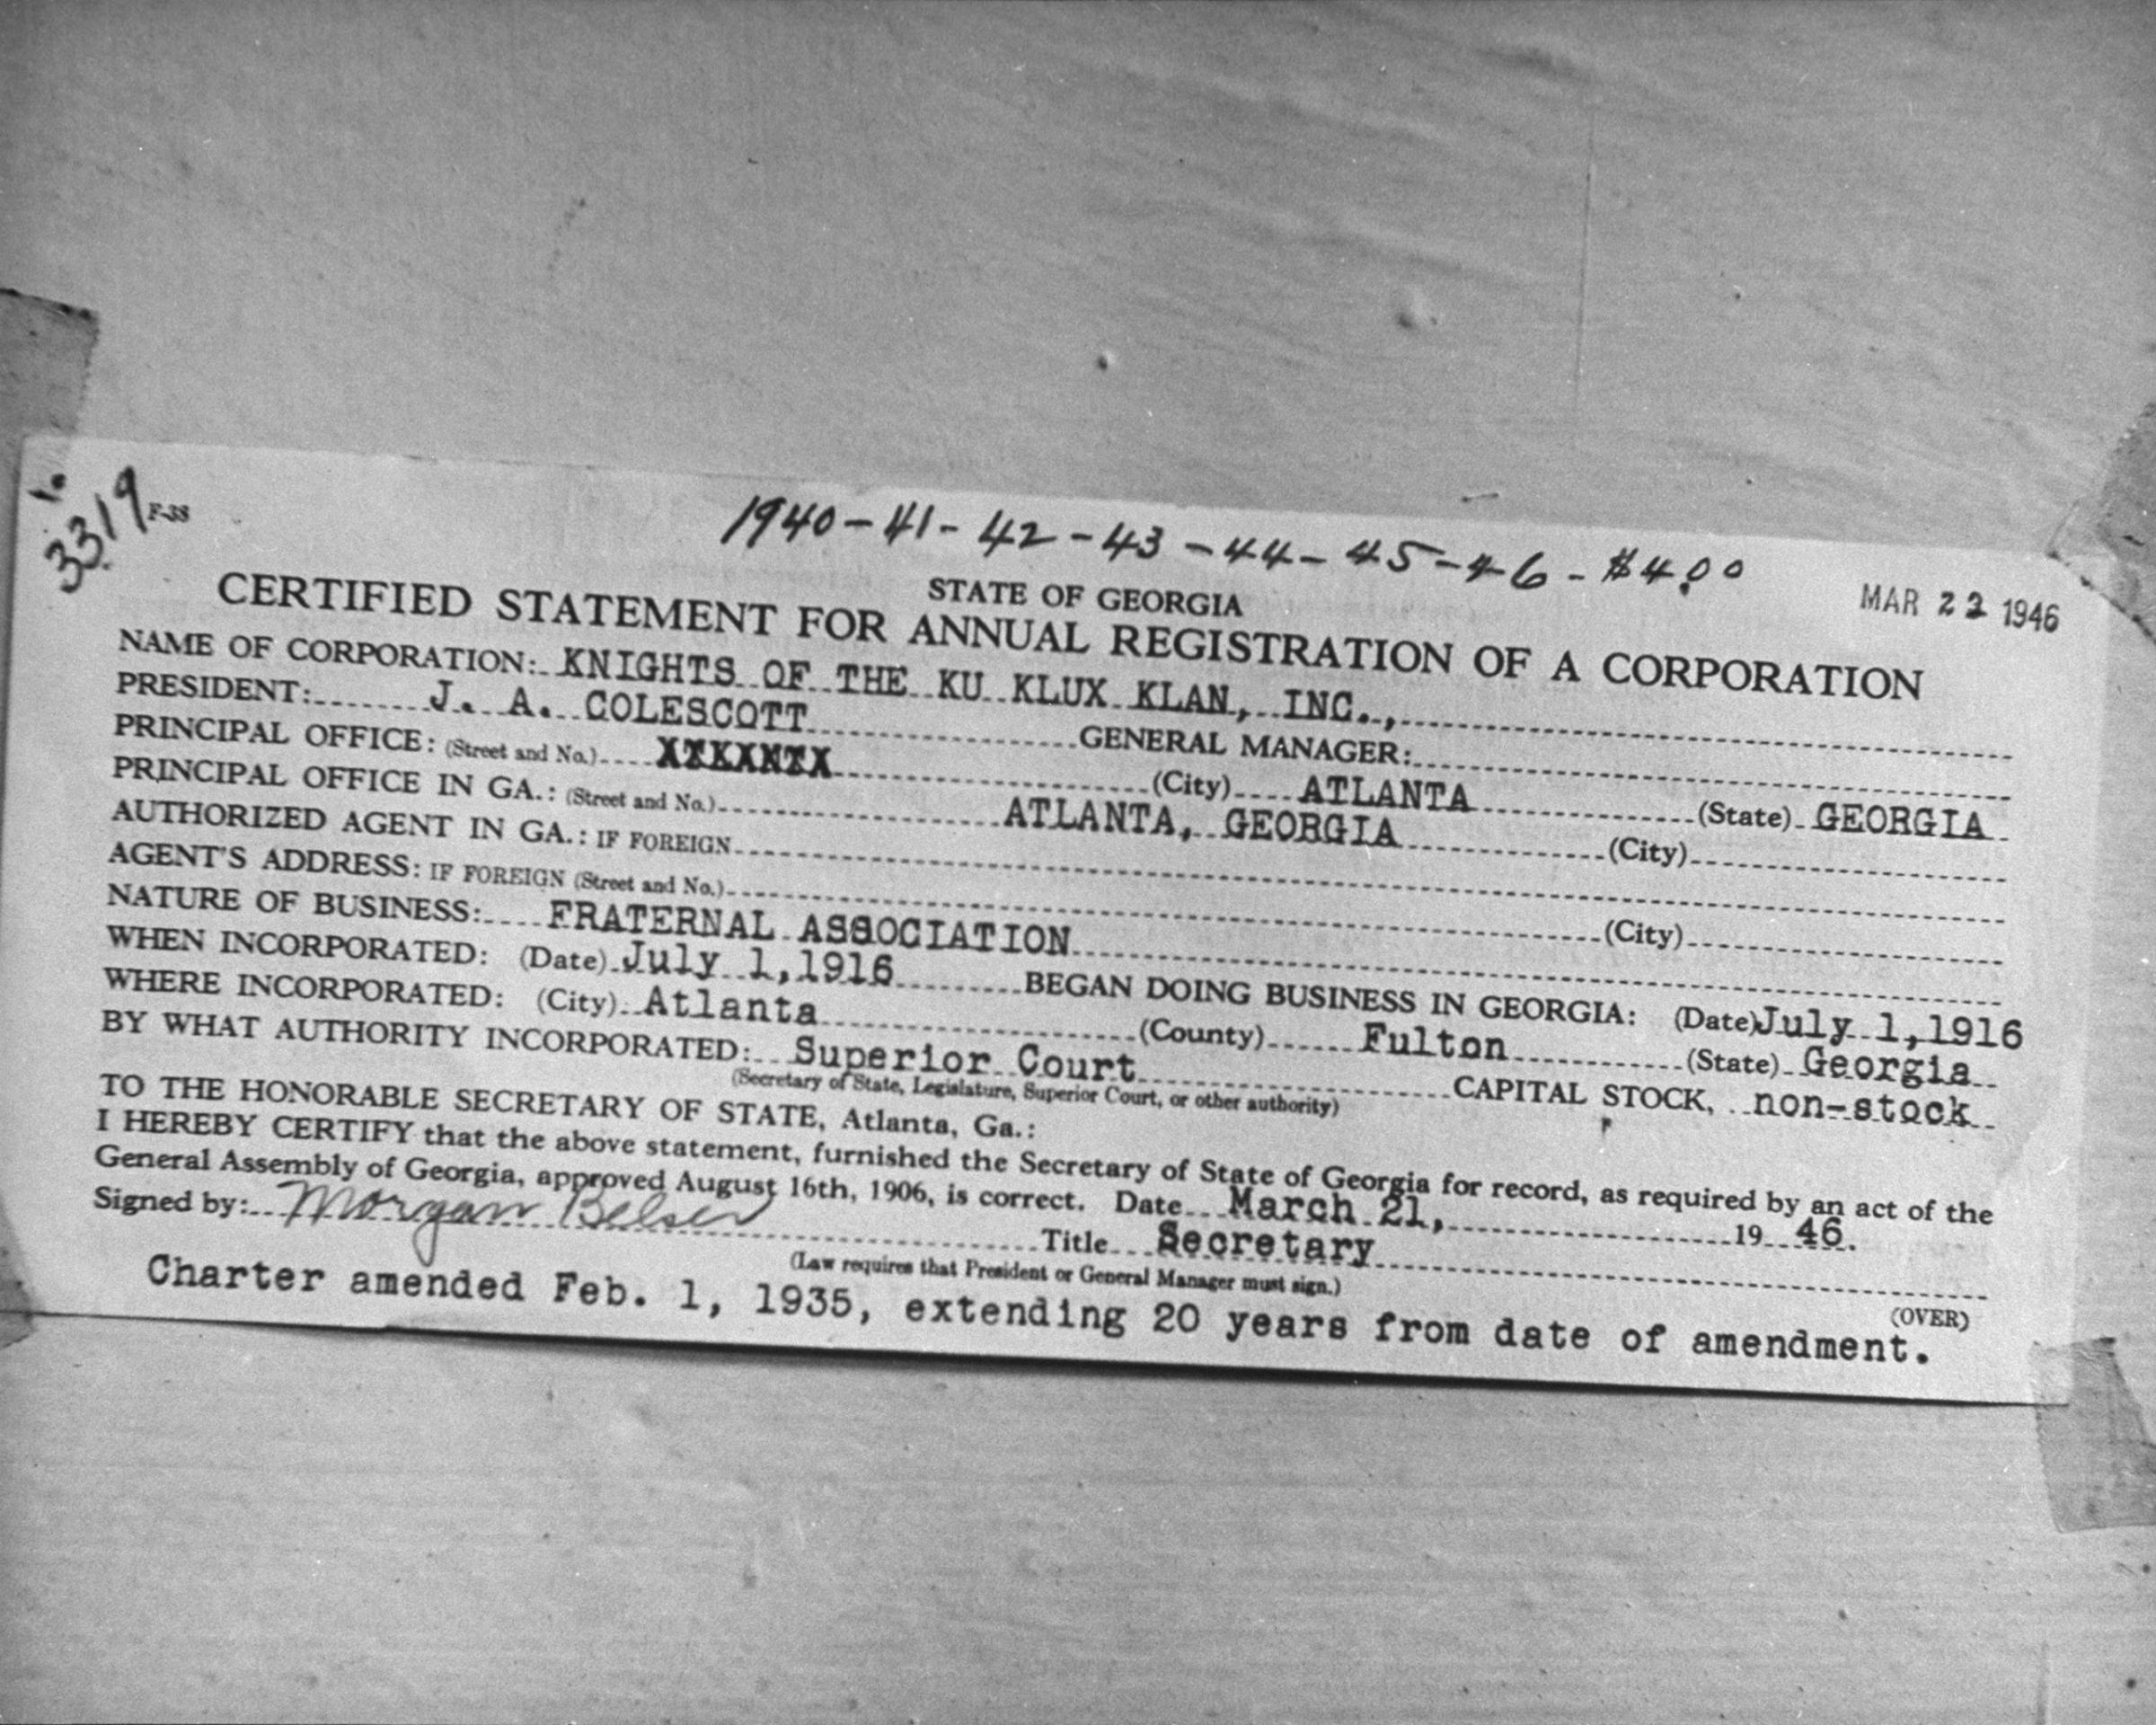 Certified Statement for Annual Registration of a Corporation for the Knights of the Ku Klux Klan, Inc., Fulton County, Ga., 1946.